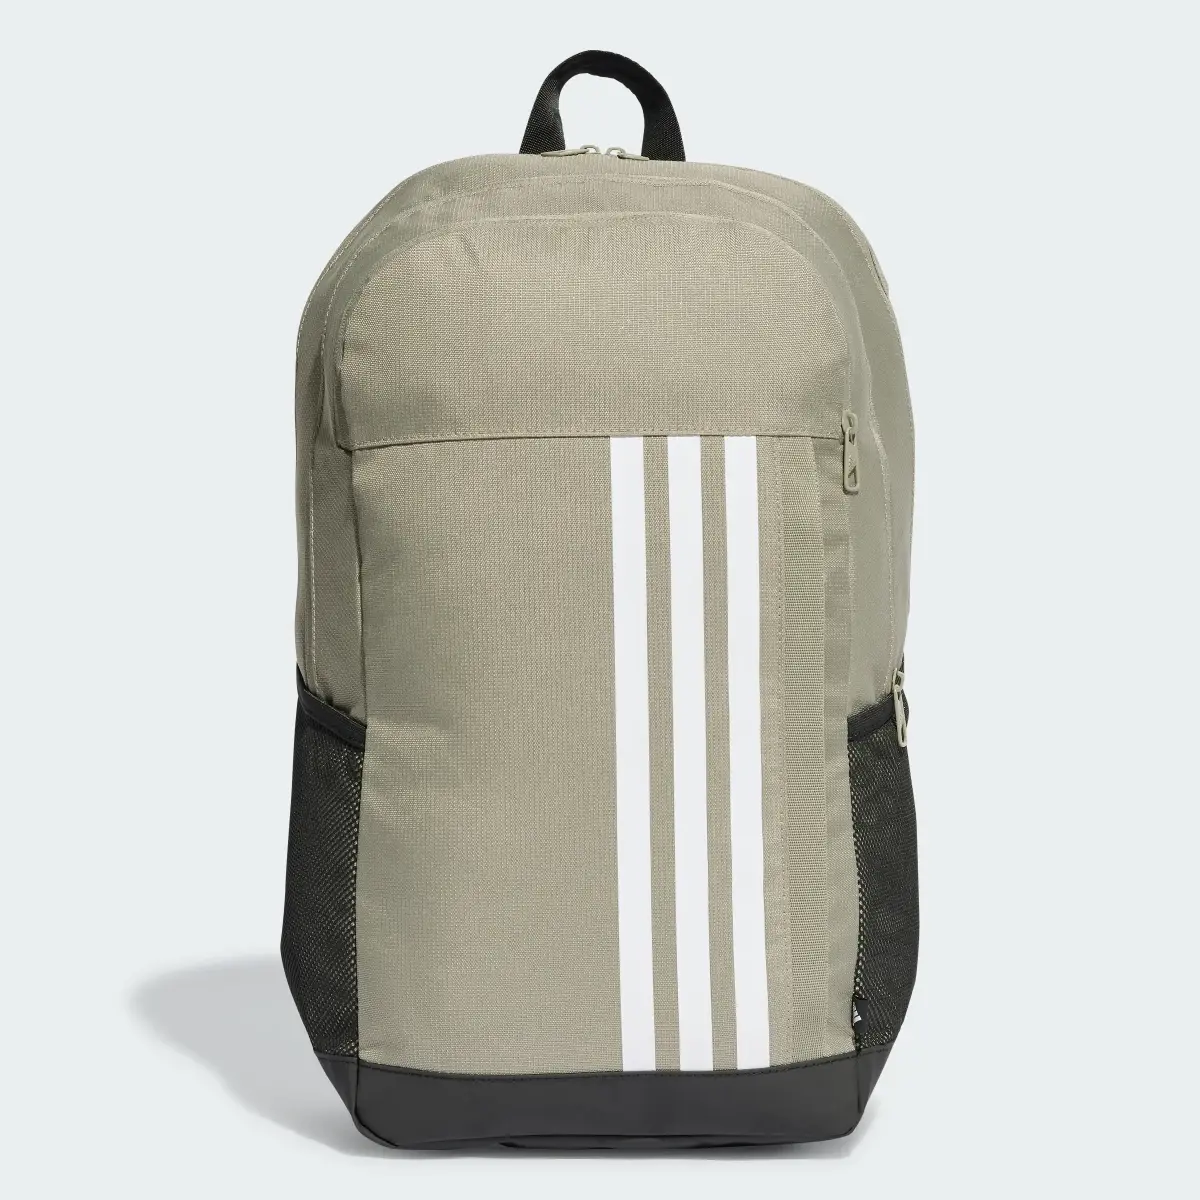 Adidas Motion 3-Stripes Backpack. 2